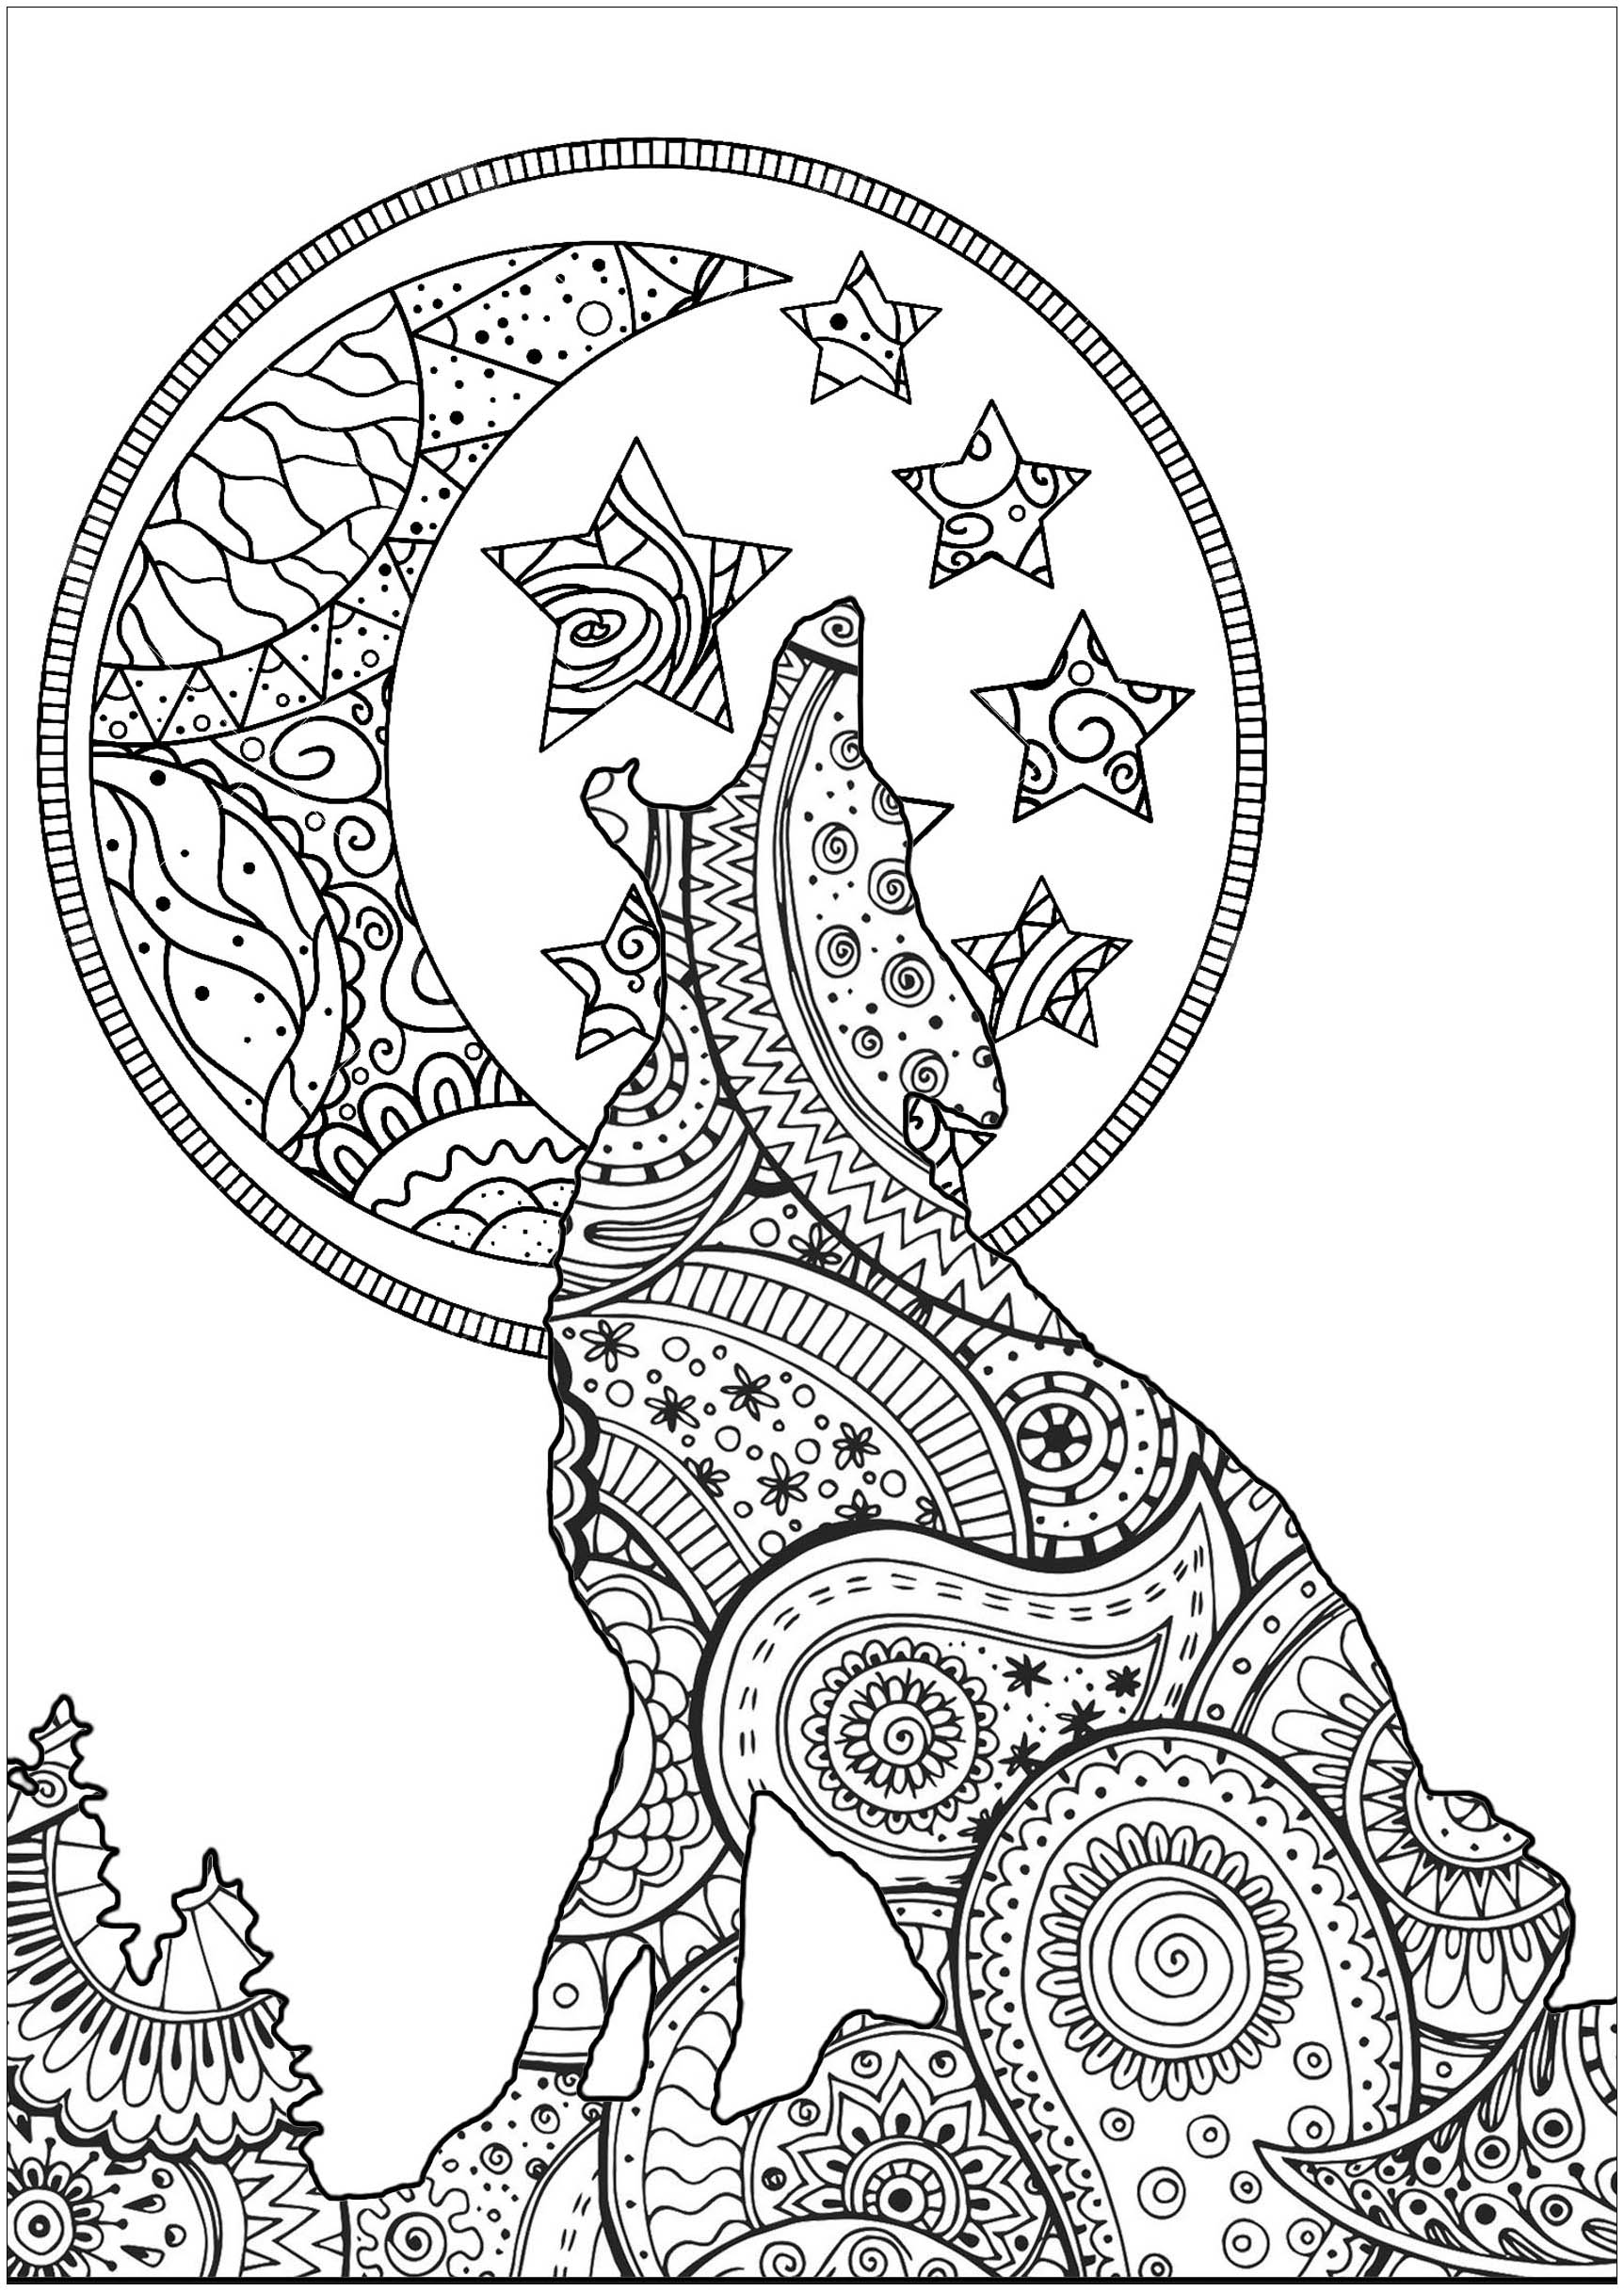 Pretty silhouette of moonlight wolf, with patterns mixing Zentangle and Paisley shapes, Artist : Art. Isabelle